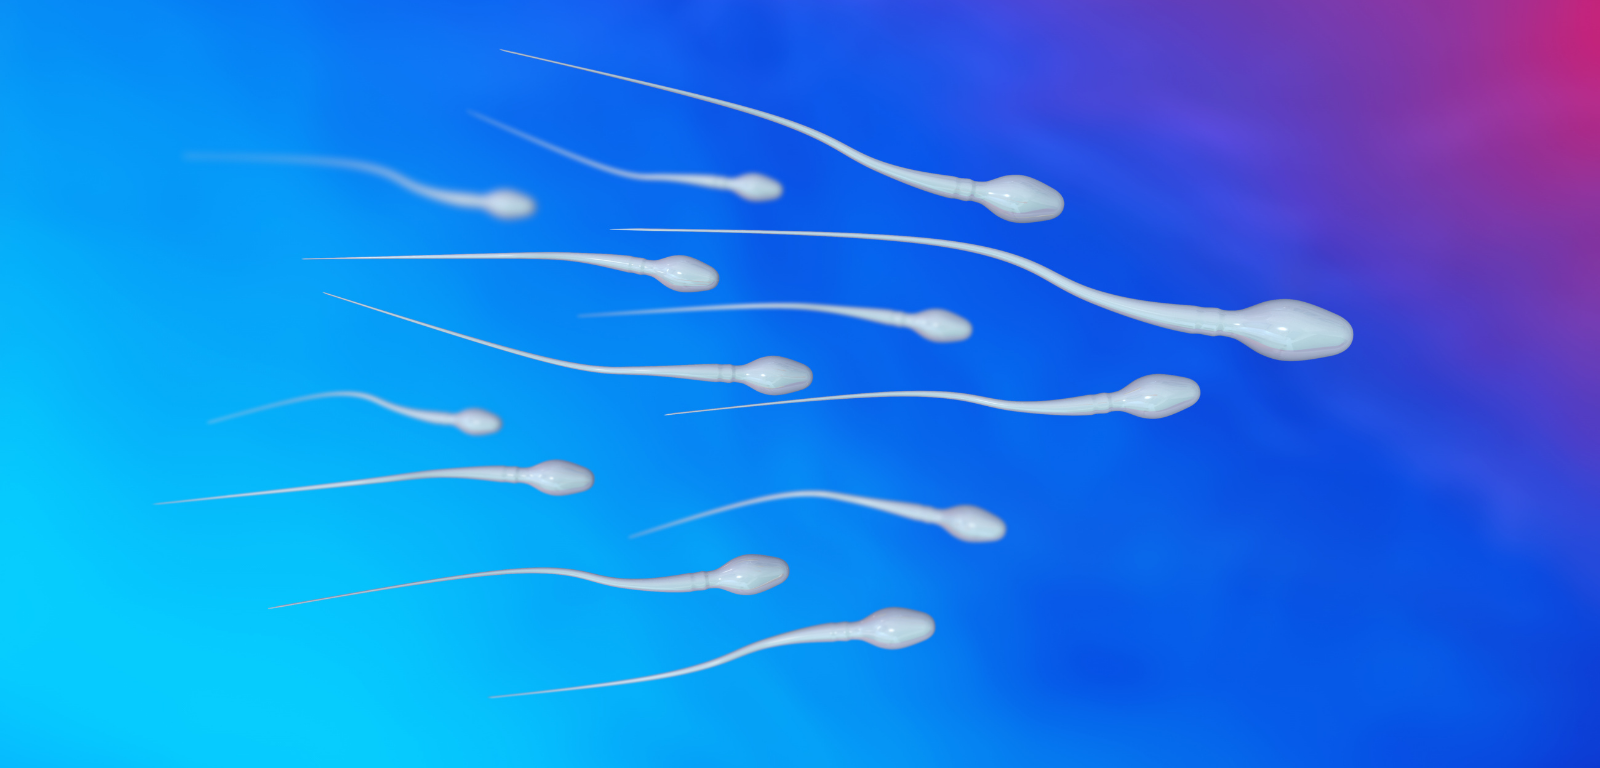 How to Increase Sperm Motility